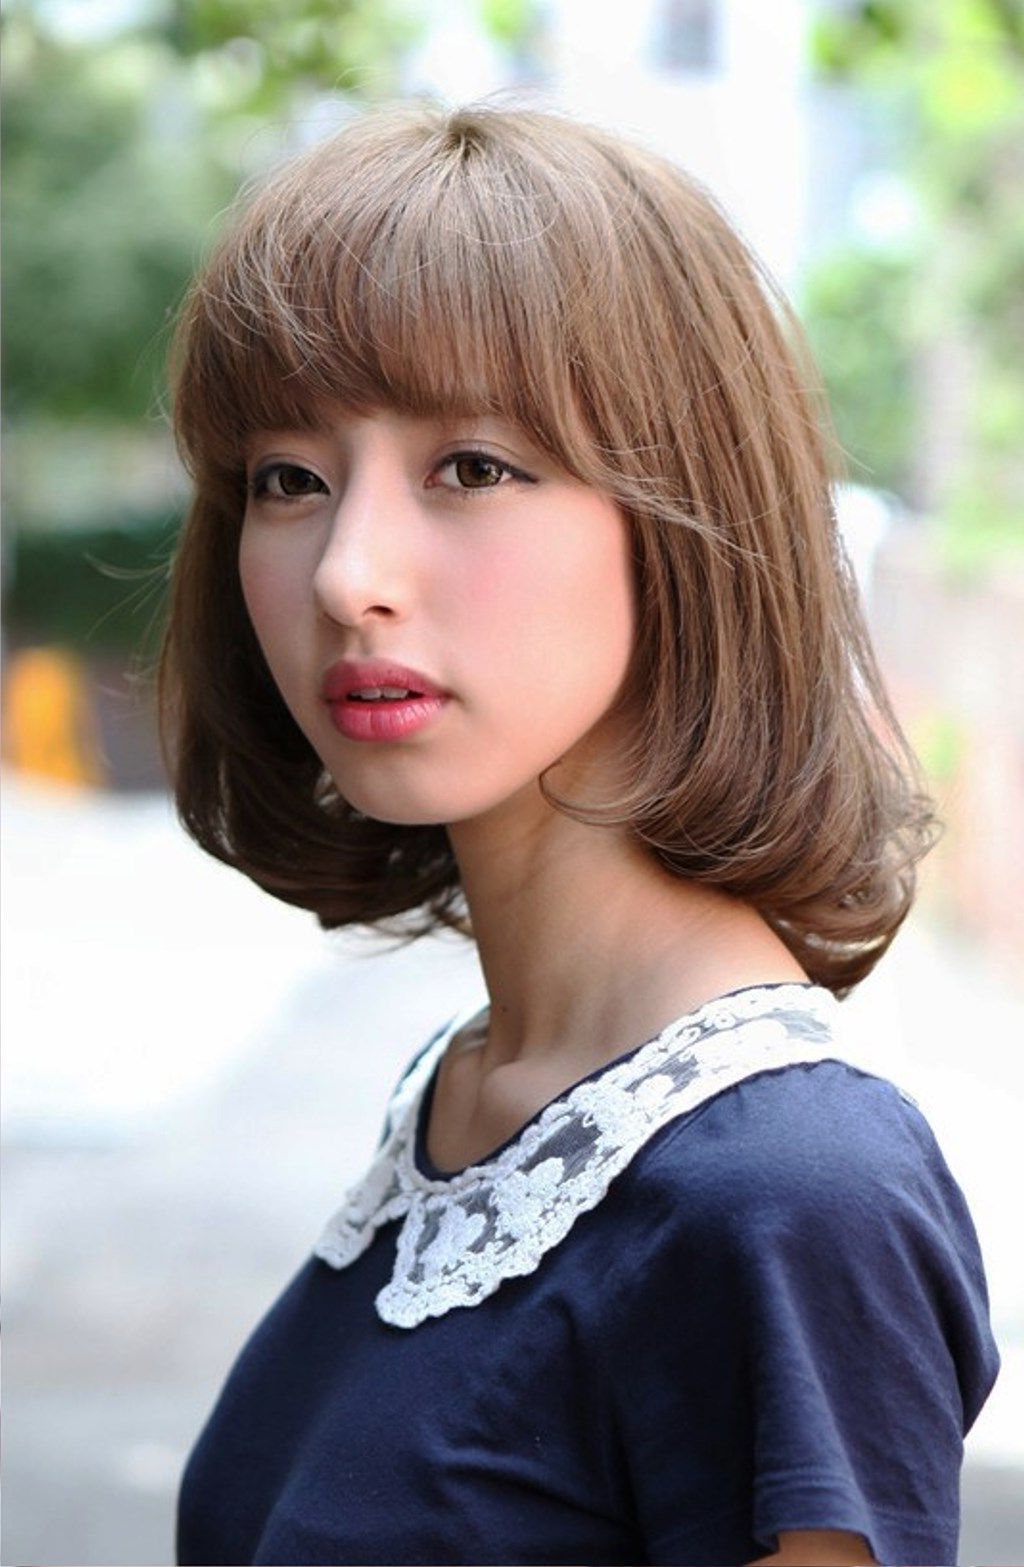 Pictures Of Cute Japanese Bob Hairstyle For Girls | Japanese Hairstyle Within Medium Asian Bob Haircuts (View 10 of 18)